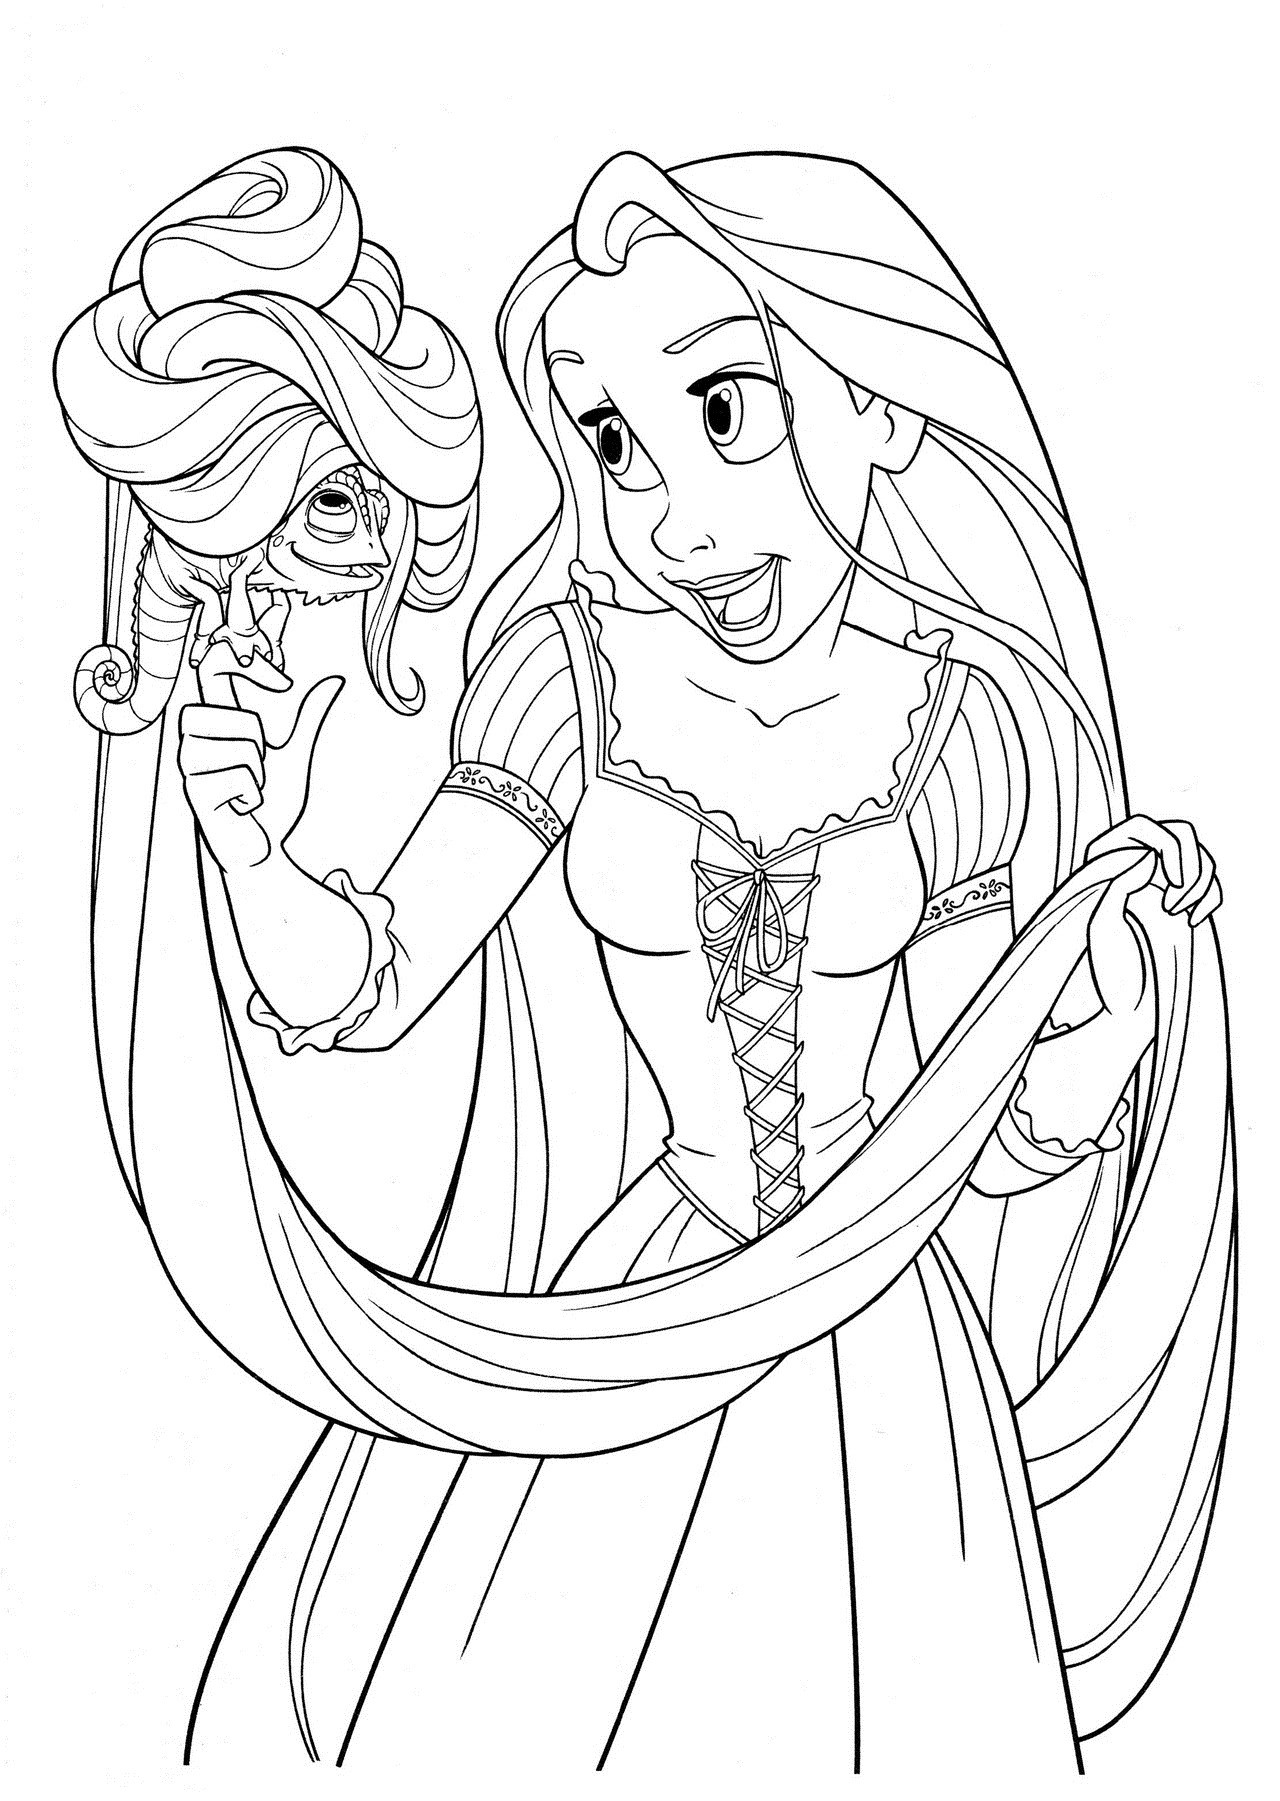 Coloring Book Pages To Print
 Free Printable Tangled Coloring Pages For Kids